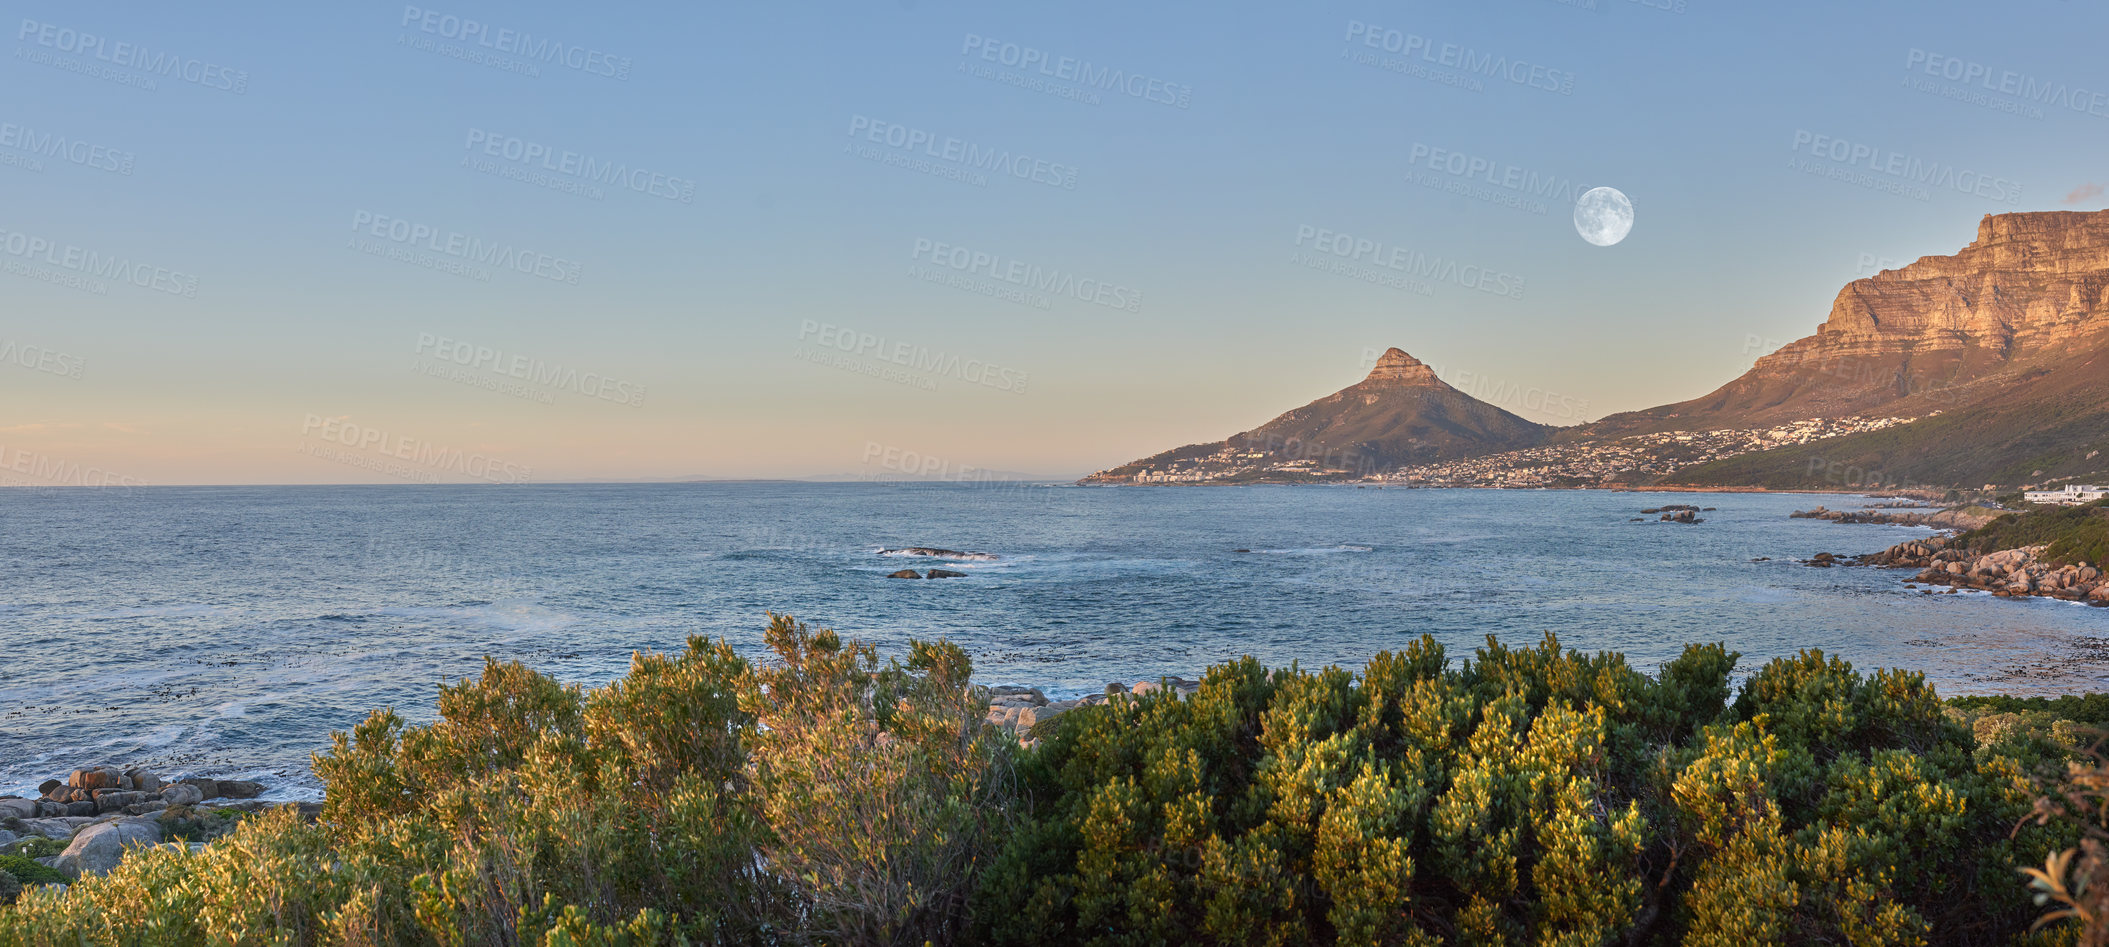 Buy stock photo Landscape view of sea water, mountains and a blue sky with copy space of Lions Head and Table Mountain in Cape Town, South Africa. Calm, serene, tranquil, ocean and relaxing nature scenery at sunrise